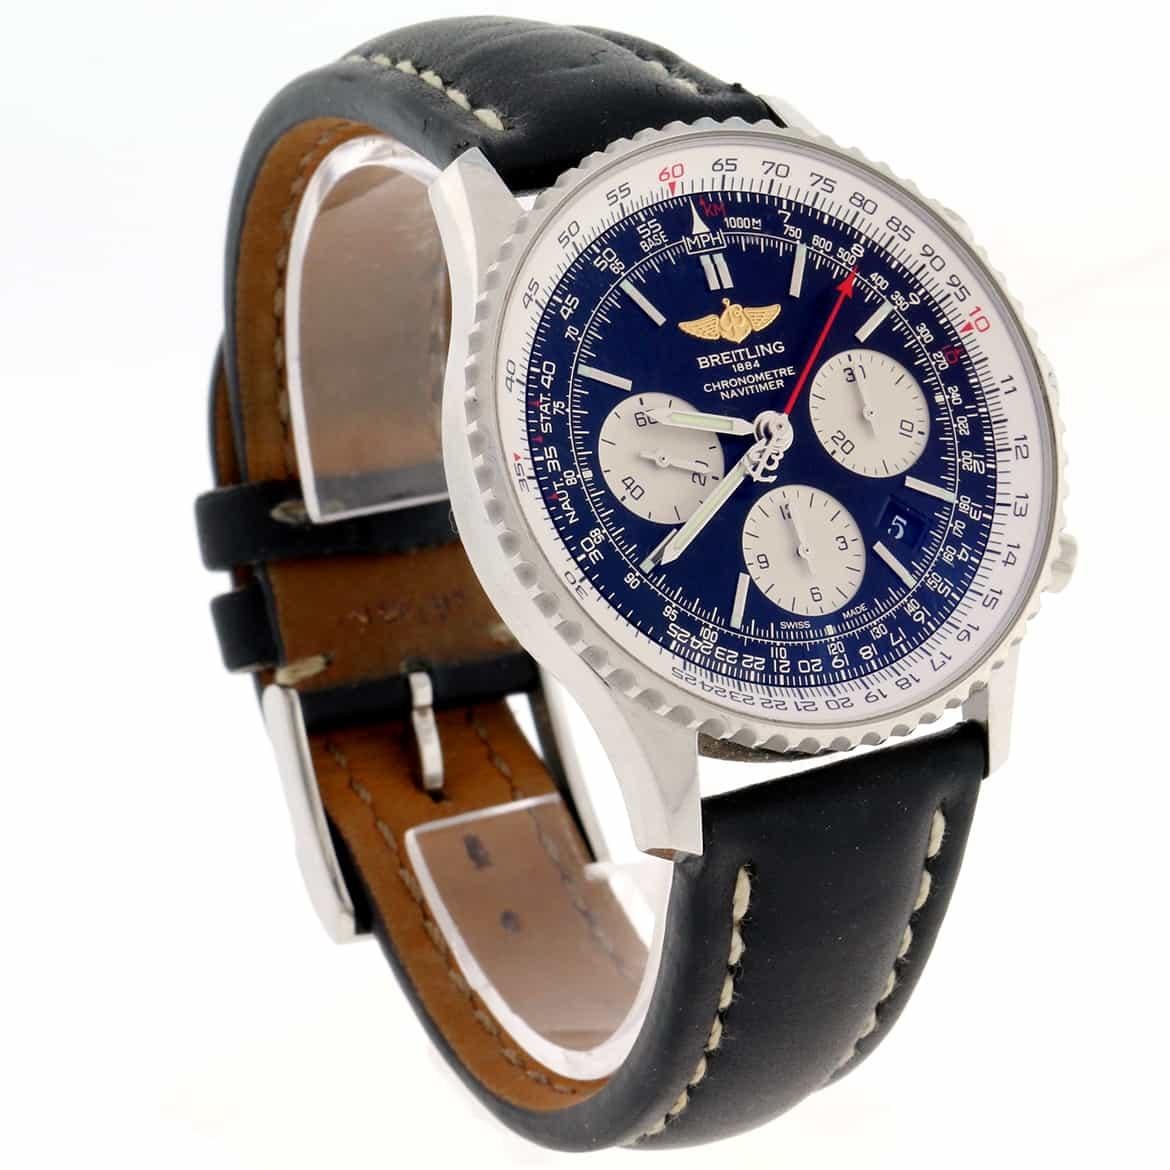 Breitling Navitimer 01 Chronograph Black Dial Automatic Watch For Sale 2